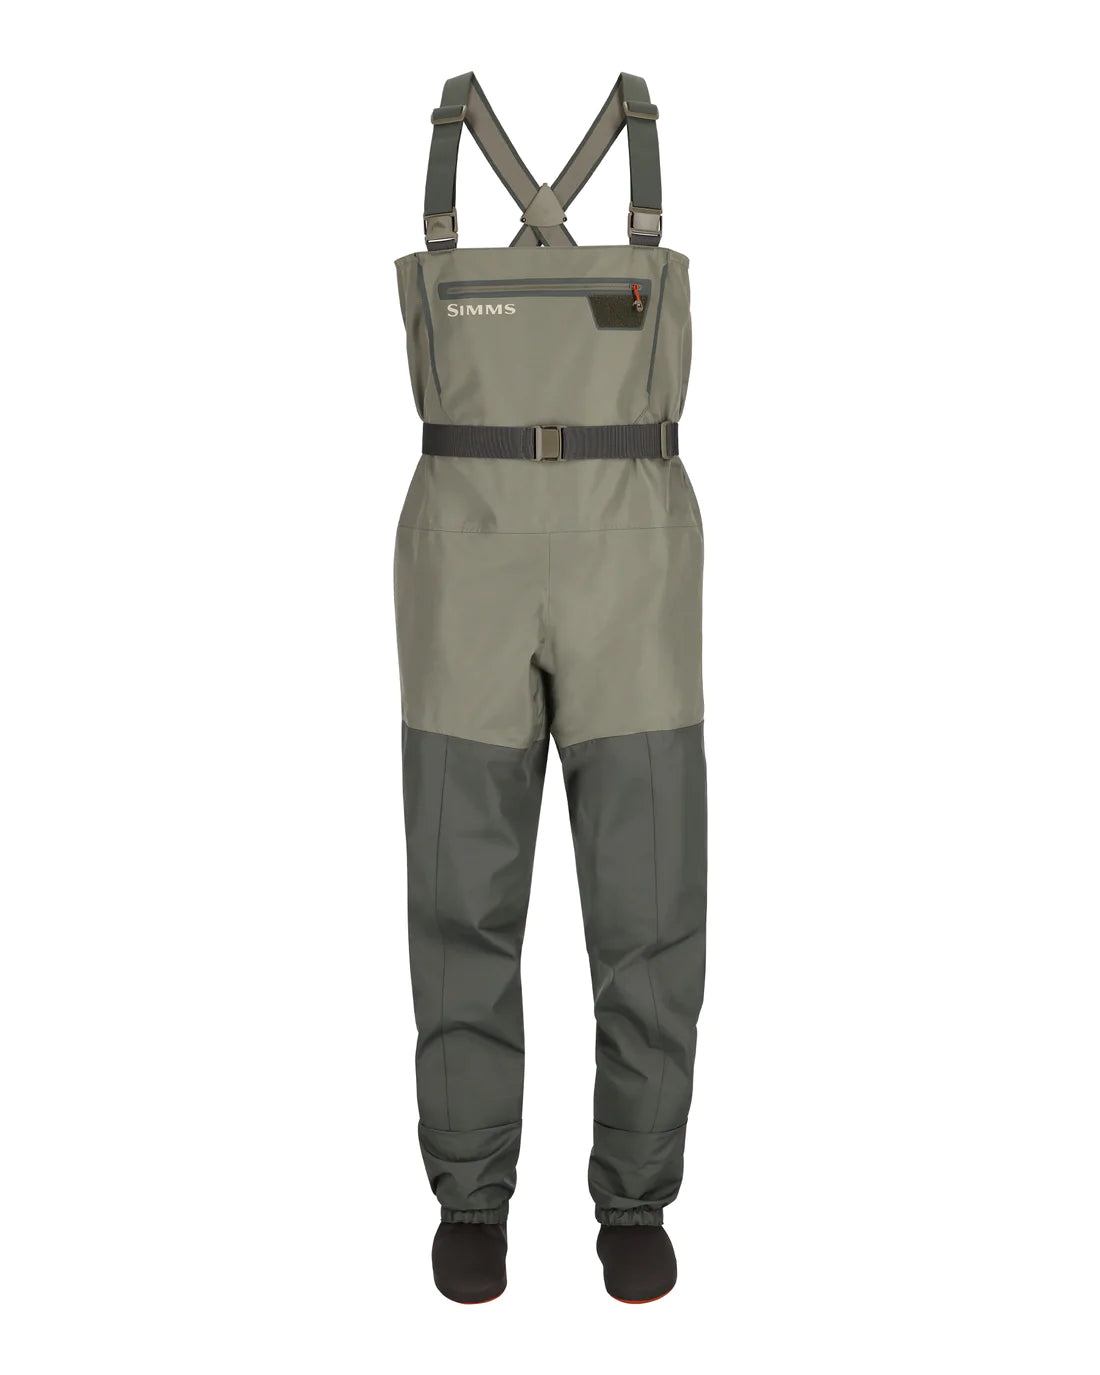 Simms Guide Classic Stockingfoot Waders a Fly Fishing Standard